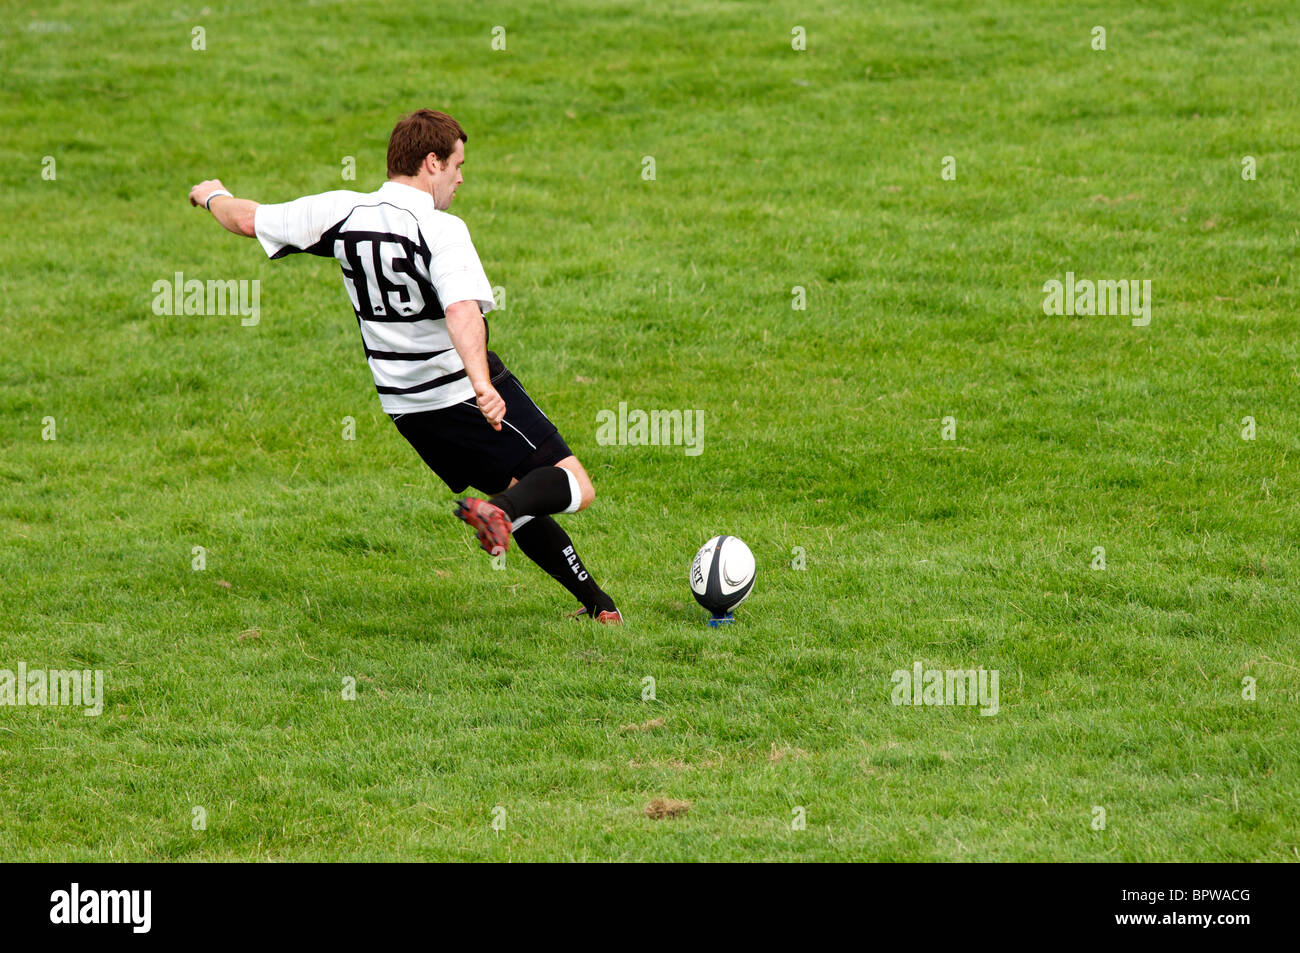 rugby player about to kick ball Stock Photo